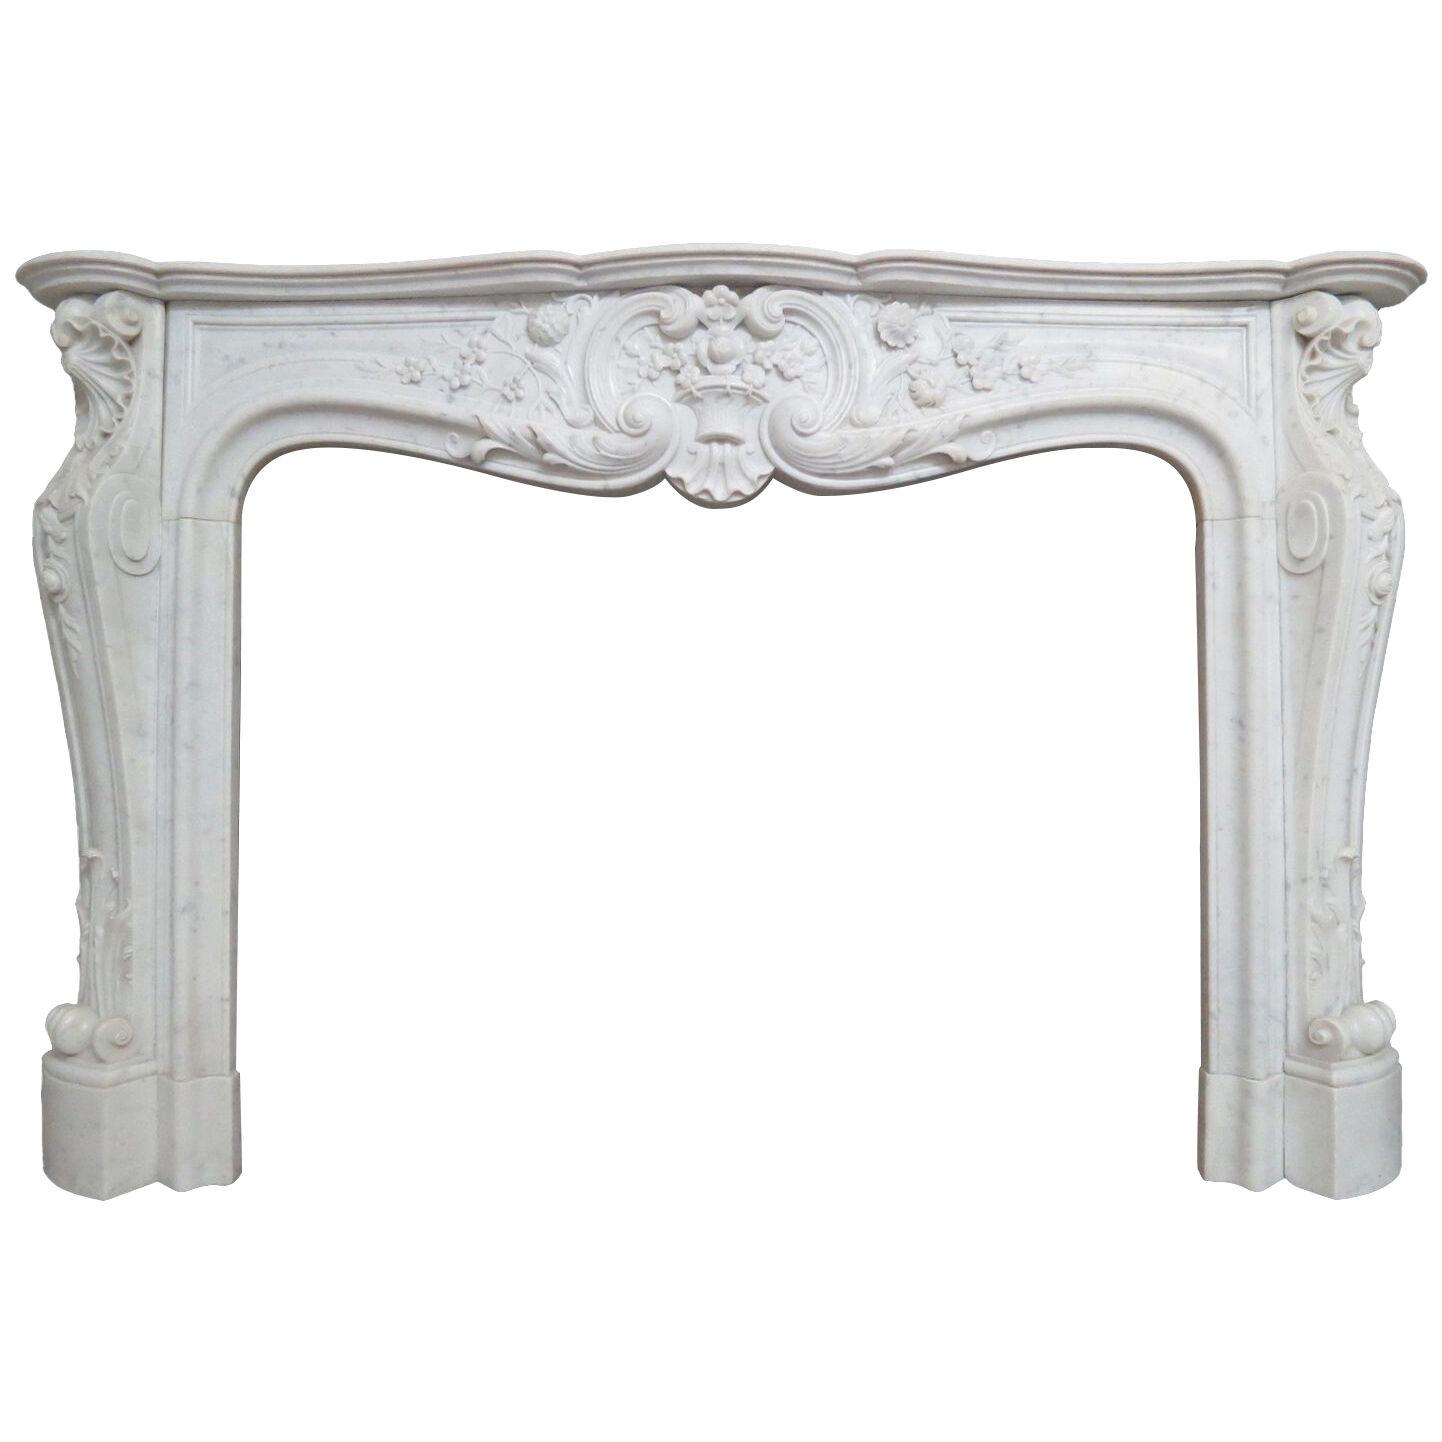 A Large French Antique Louis XV Carrara Marble Fireplace Mantel